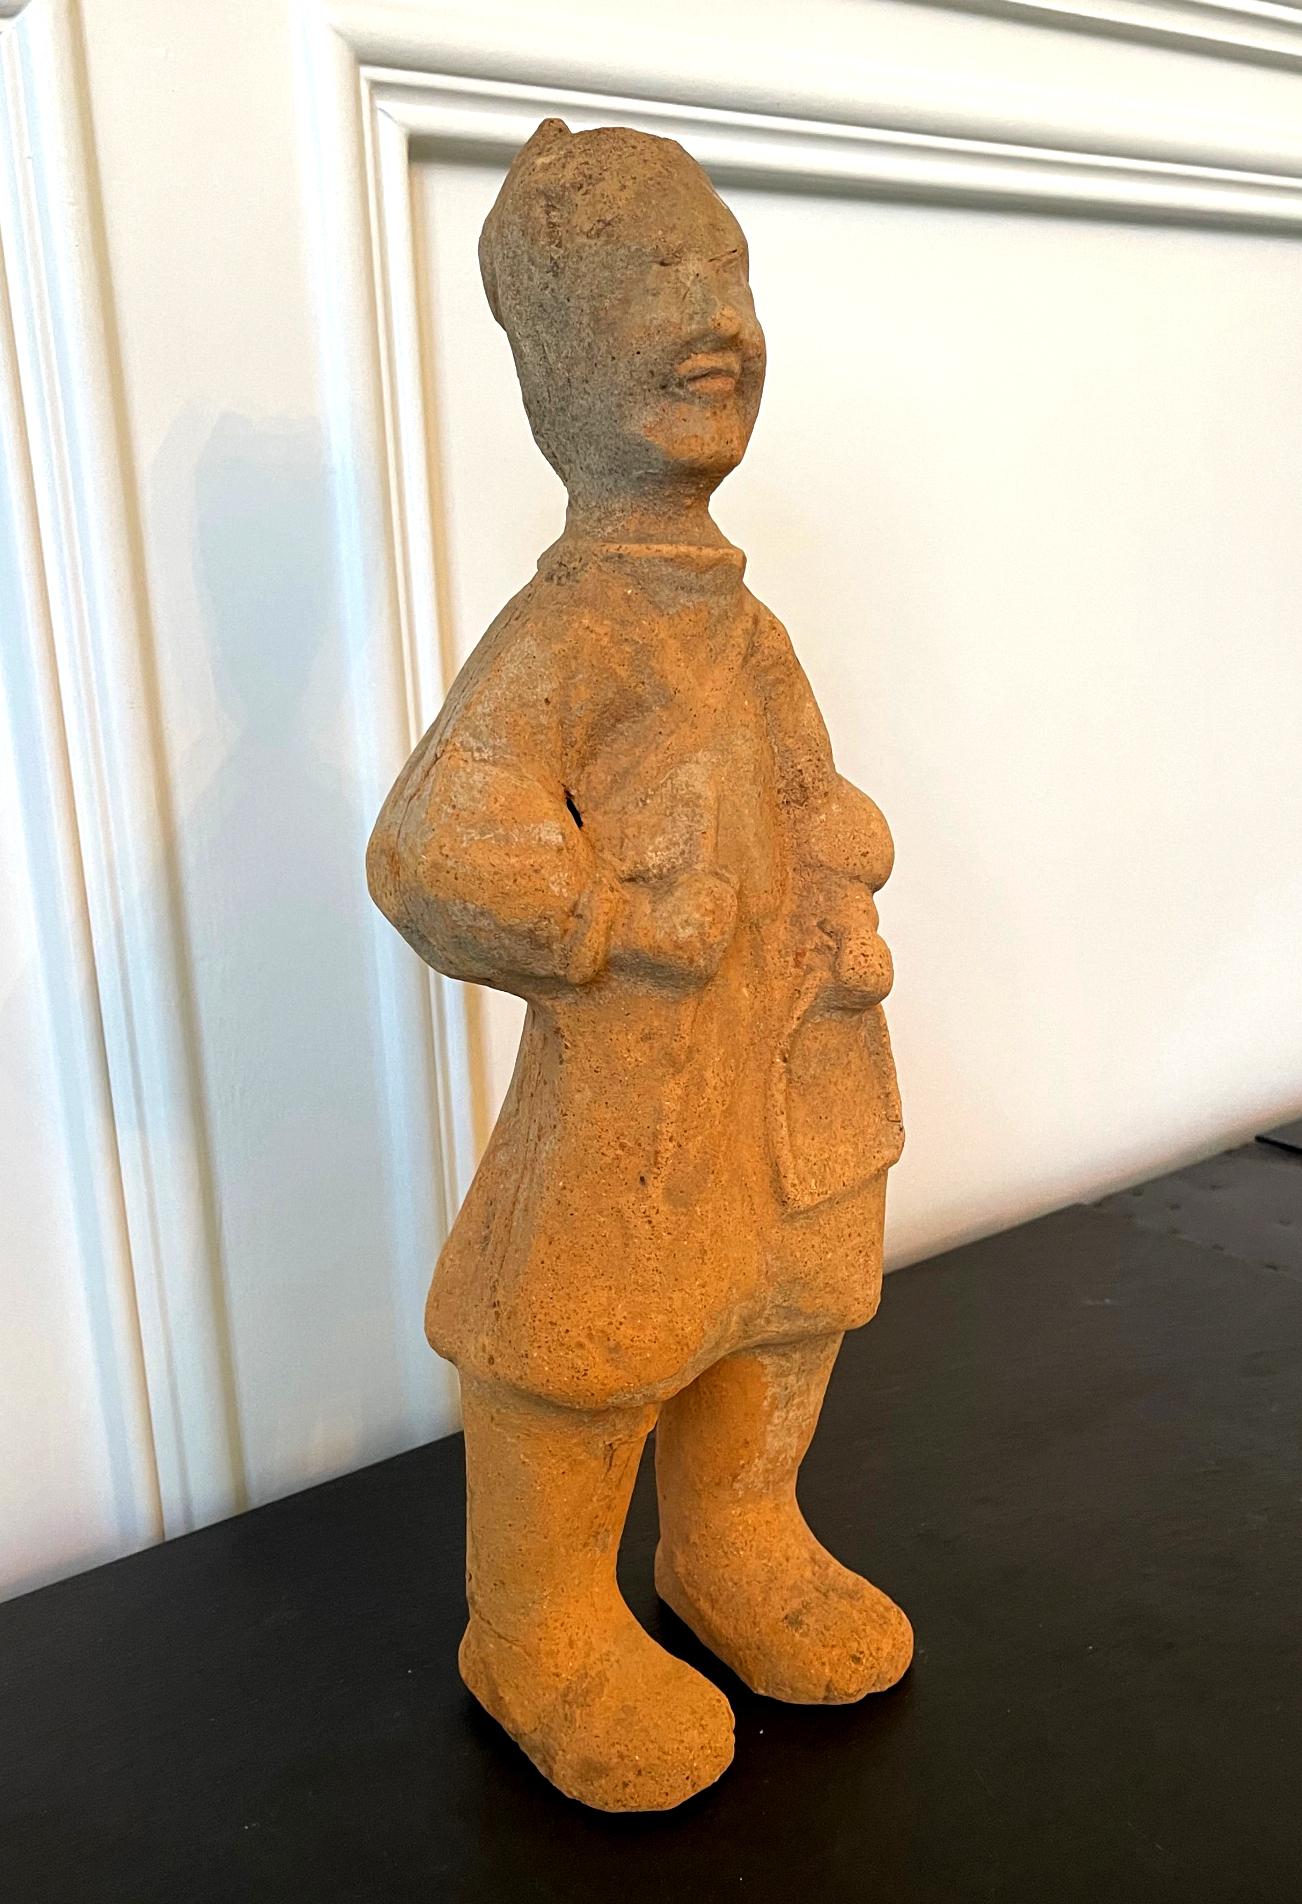 A Chinese terracotta tomb figure (Ni Yong) from East Han Dynasty (25-220 AD), likely from the area of nowadays Sichuan. It depicts a horse groomer with tool and harness in hand. Dressed in a short robe, the figure exhibits a soft smiley facial